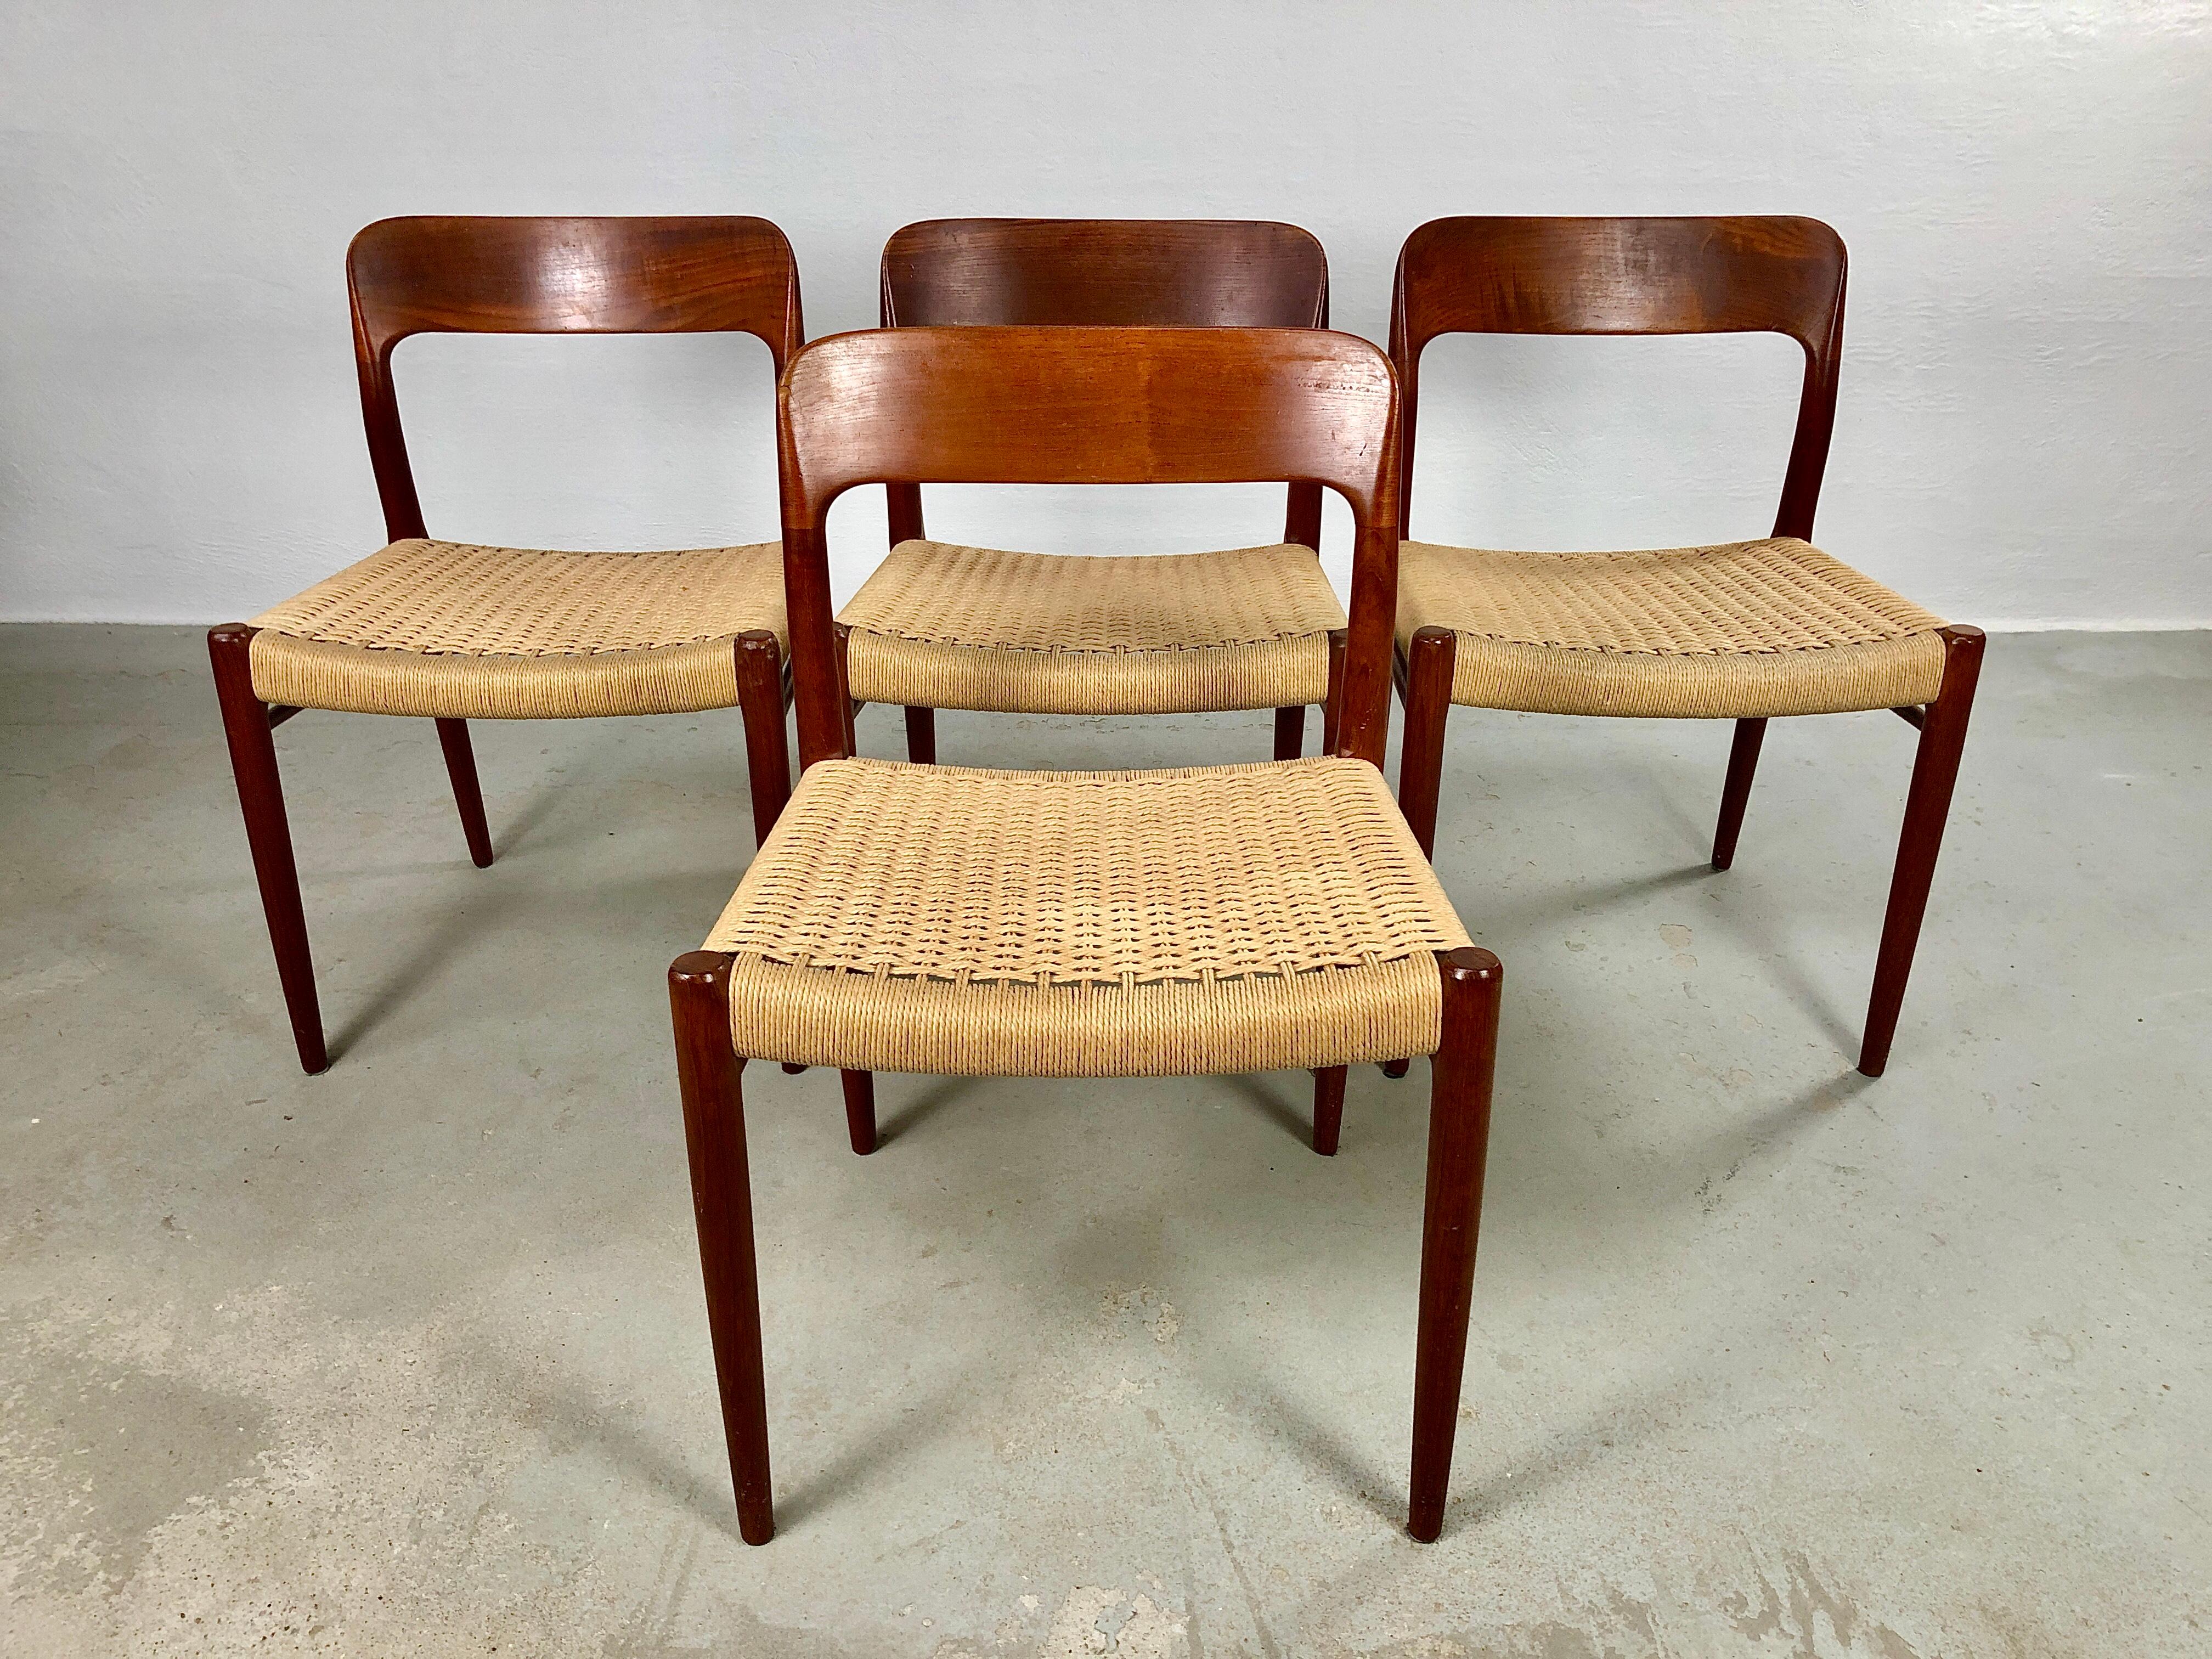 Set of four fully restored Niels Otto Møller model 77 teak dining chairs with papercord seats designed by by Niels Otto Møller in 1959 and produced by J.L. Møllers Møbelfabrik in the 1960´s.

Niels Otto Møller was among the top danish mid century